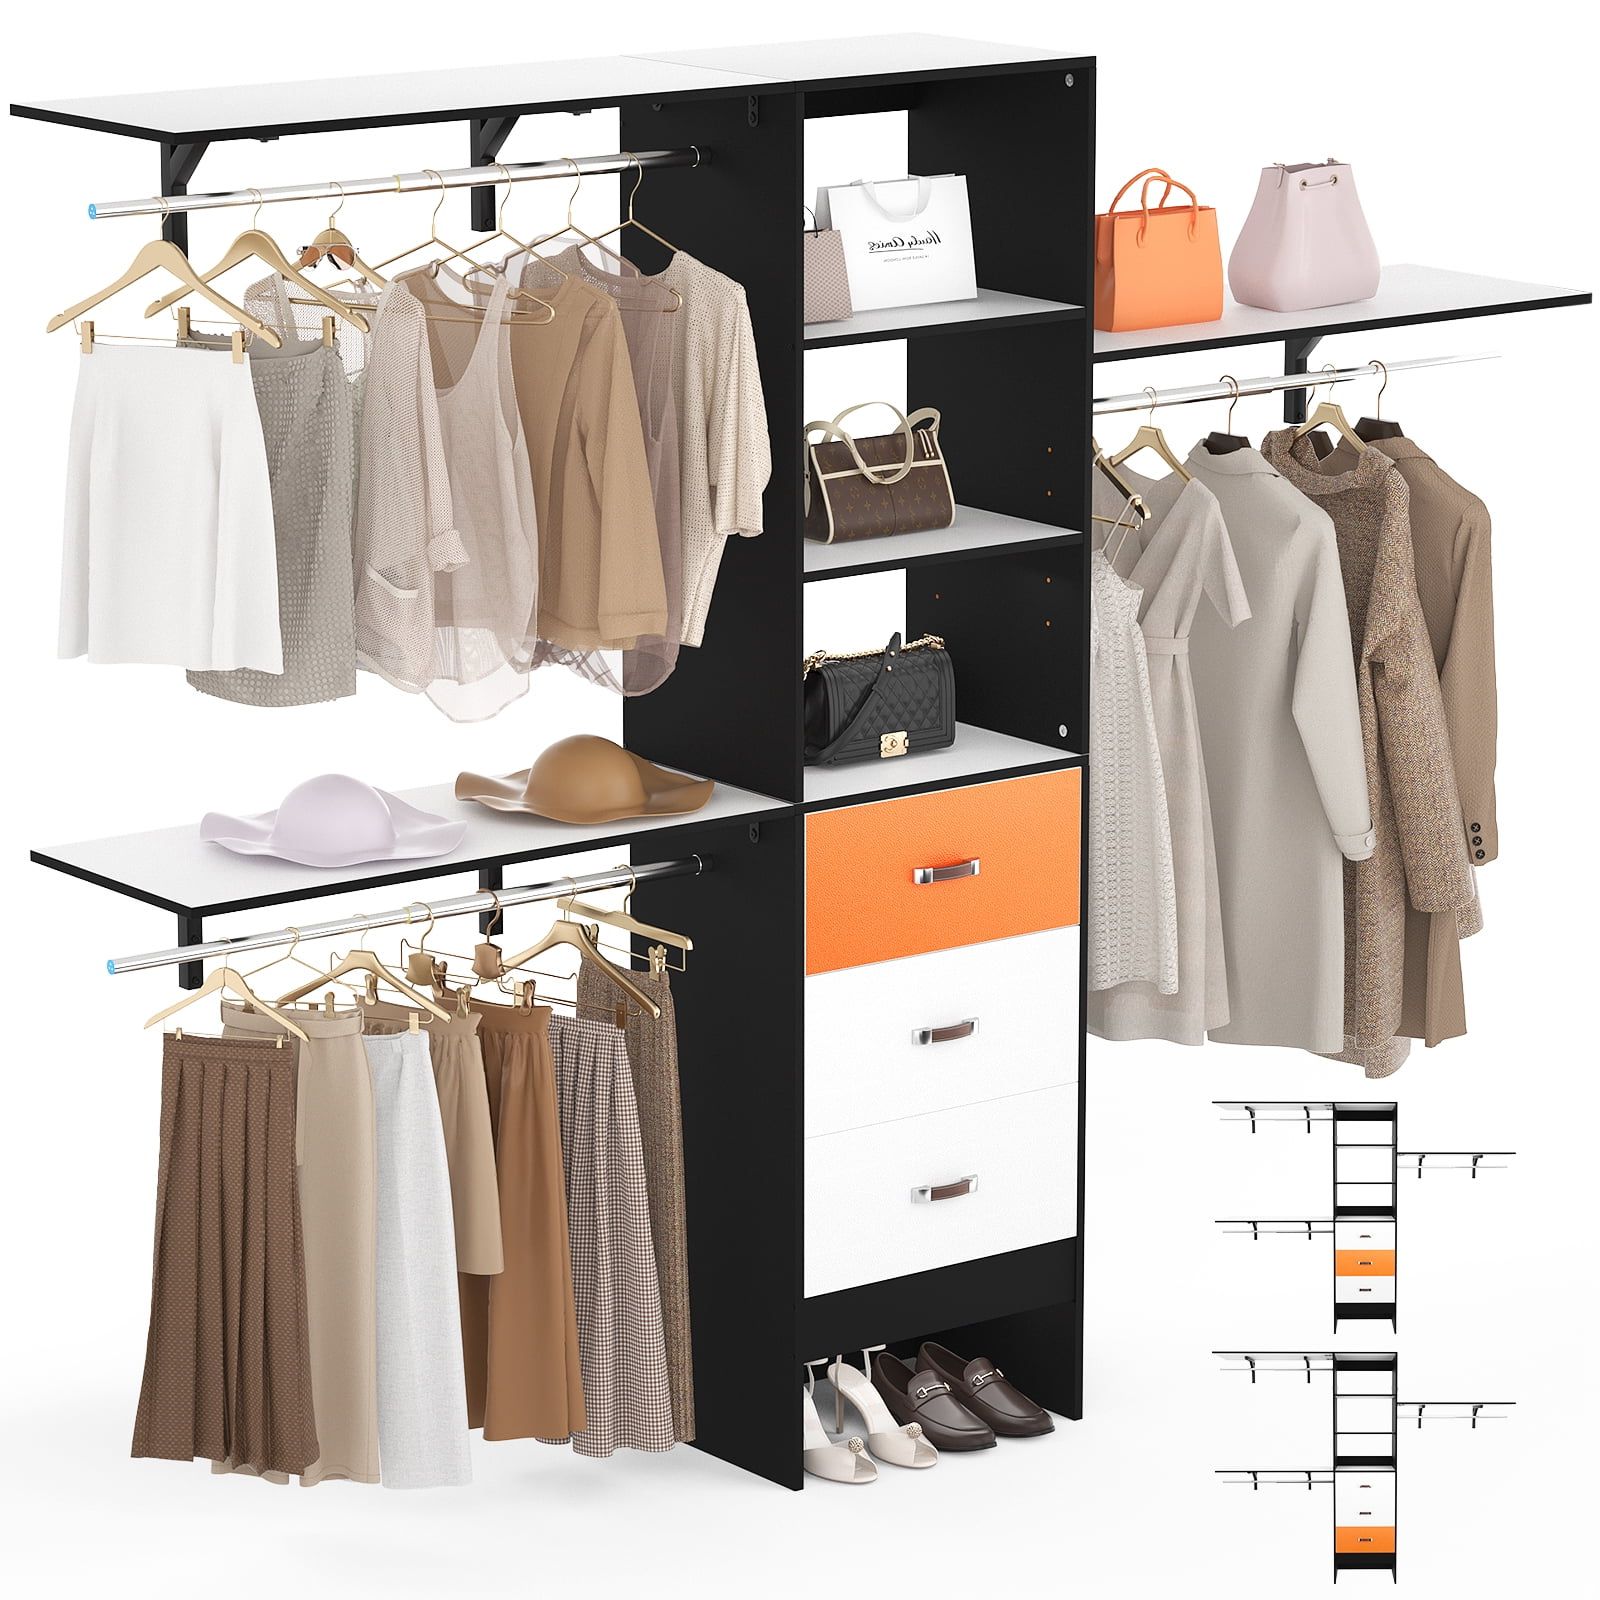 Preferred 3 Shelving Towers Wardrobes Intended For Homieasy 96 Inches Closet System, 8ft Walk In Closet Organizer With 3  Shelving Towers, Heavy Duty Clothes Rack With 3 Drawers, Built In Garment  Rack, 96" L X 16" W X 75" H, (View 4 of 10)